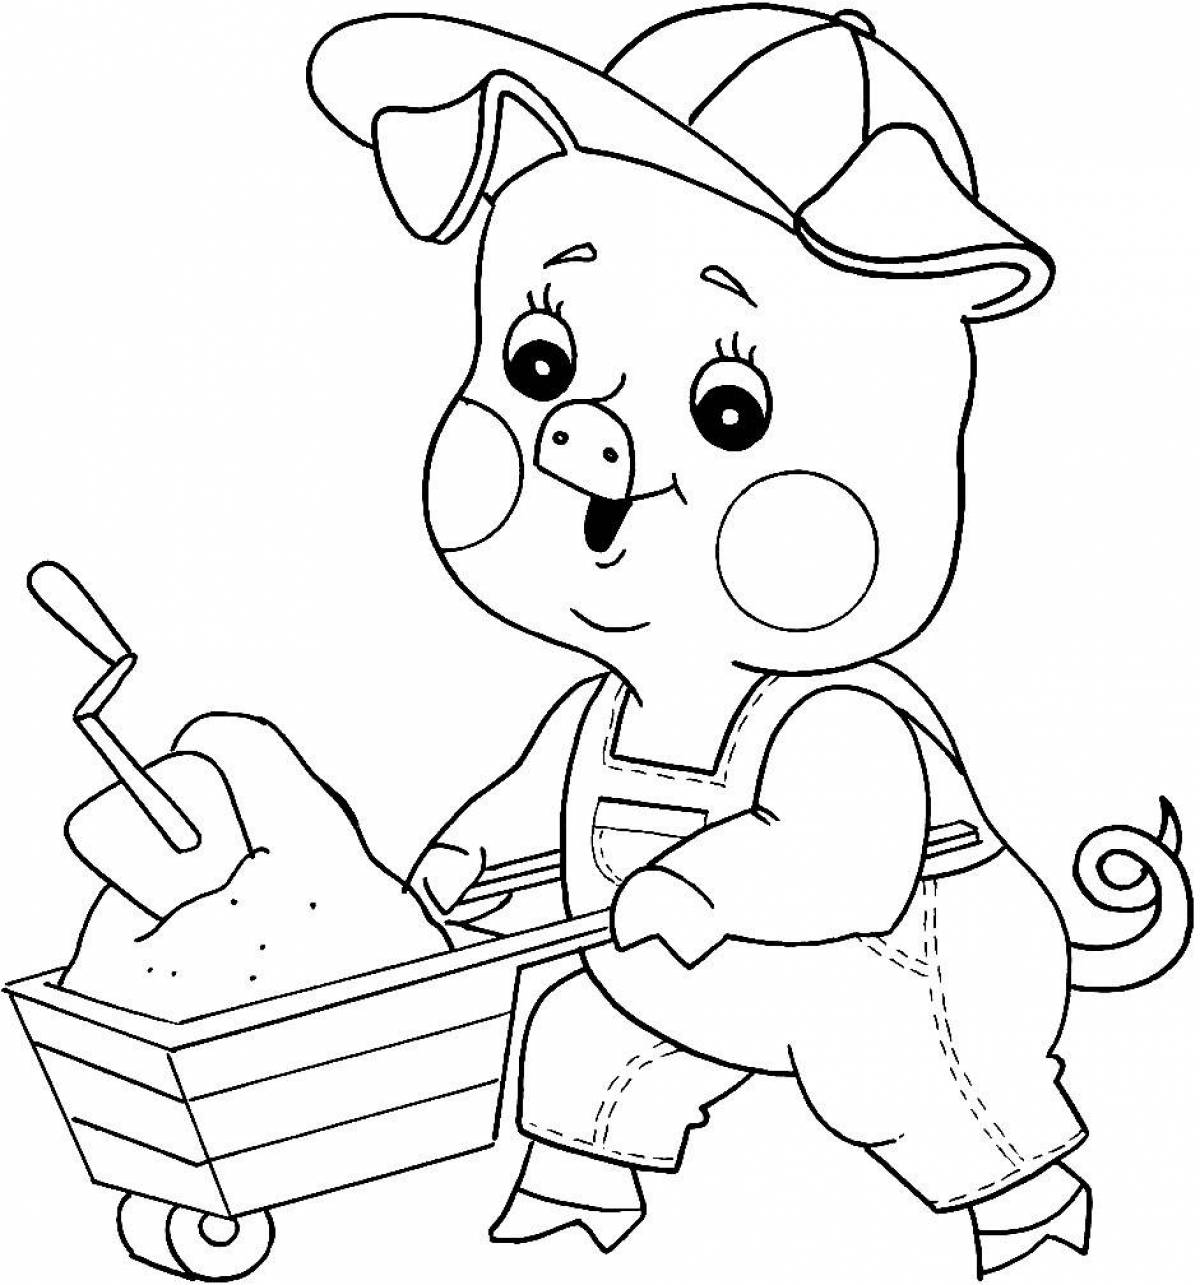 Dazzling coloring pages fairy tale characters